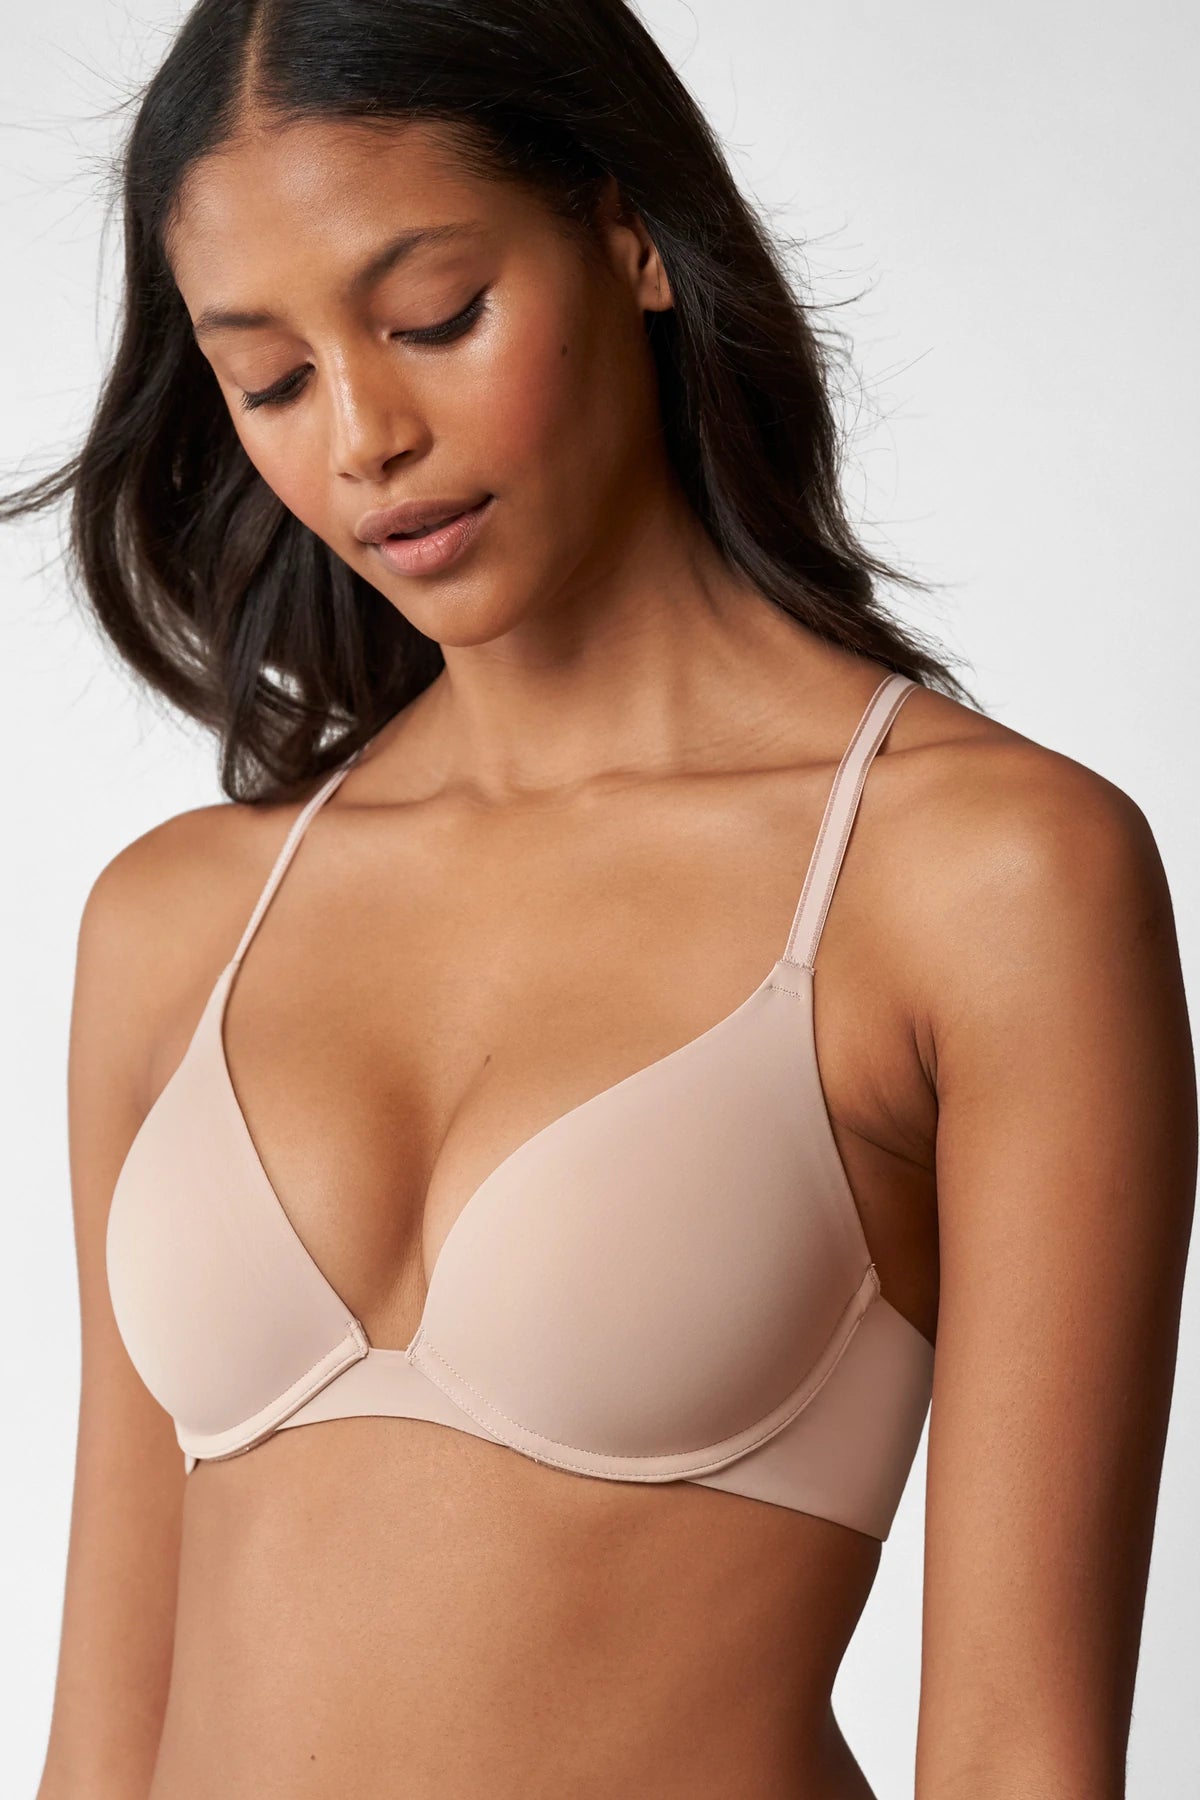 This Wireless Convertible Bra Is Backed by Over 1,800